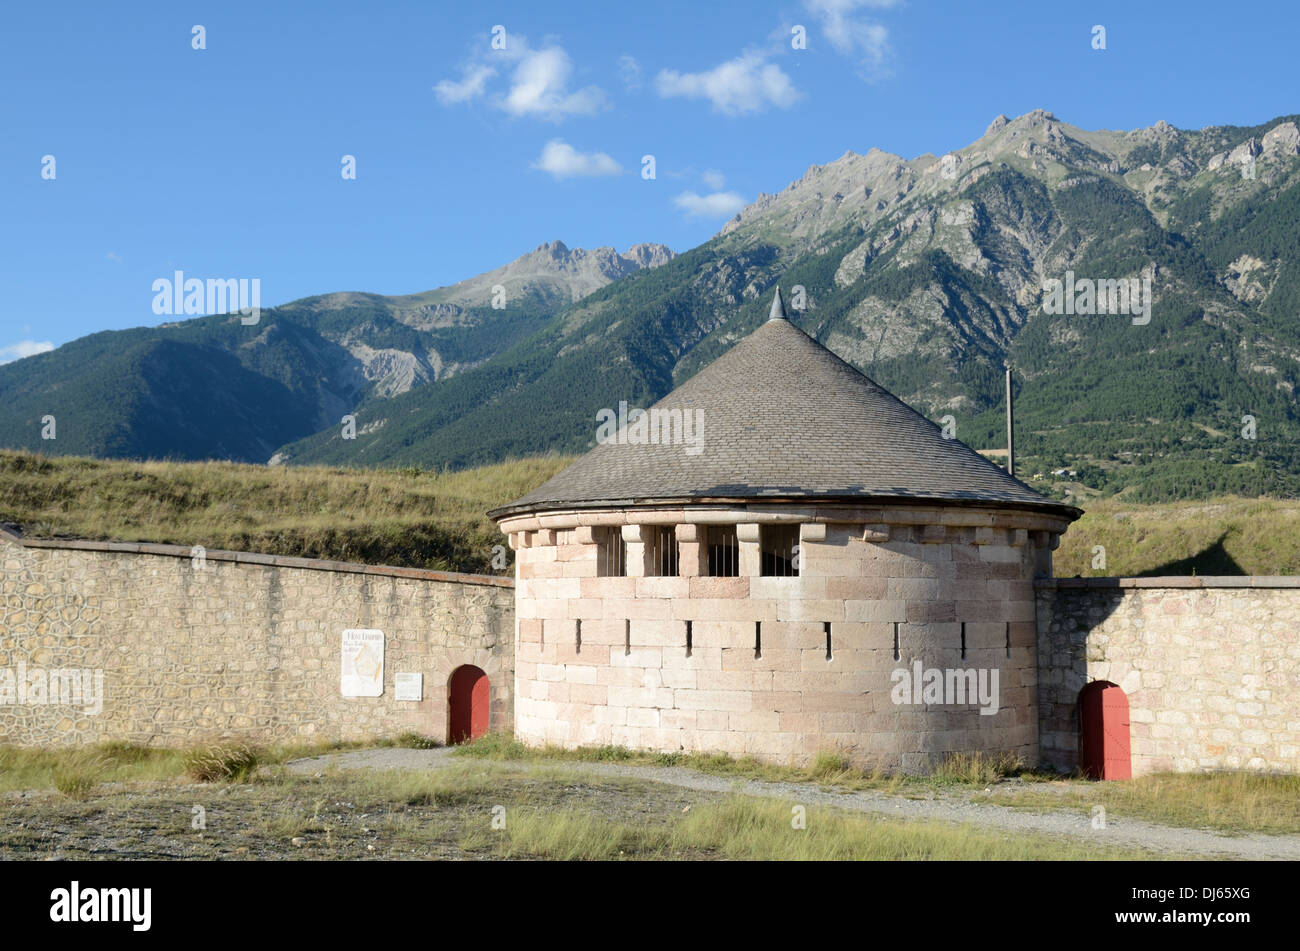 Vauban Fortifications & Look-out Tower with Meurtières or Murder Holes of Walled Town of Mont-Dauphin Hautes-Alpes France Stock Photo